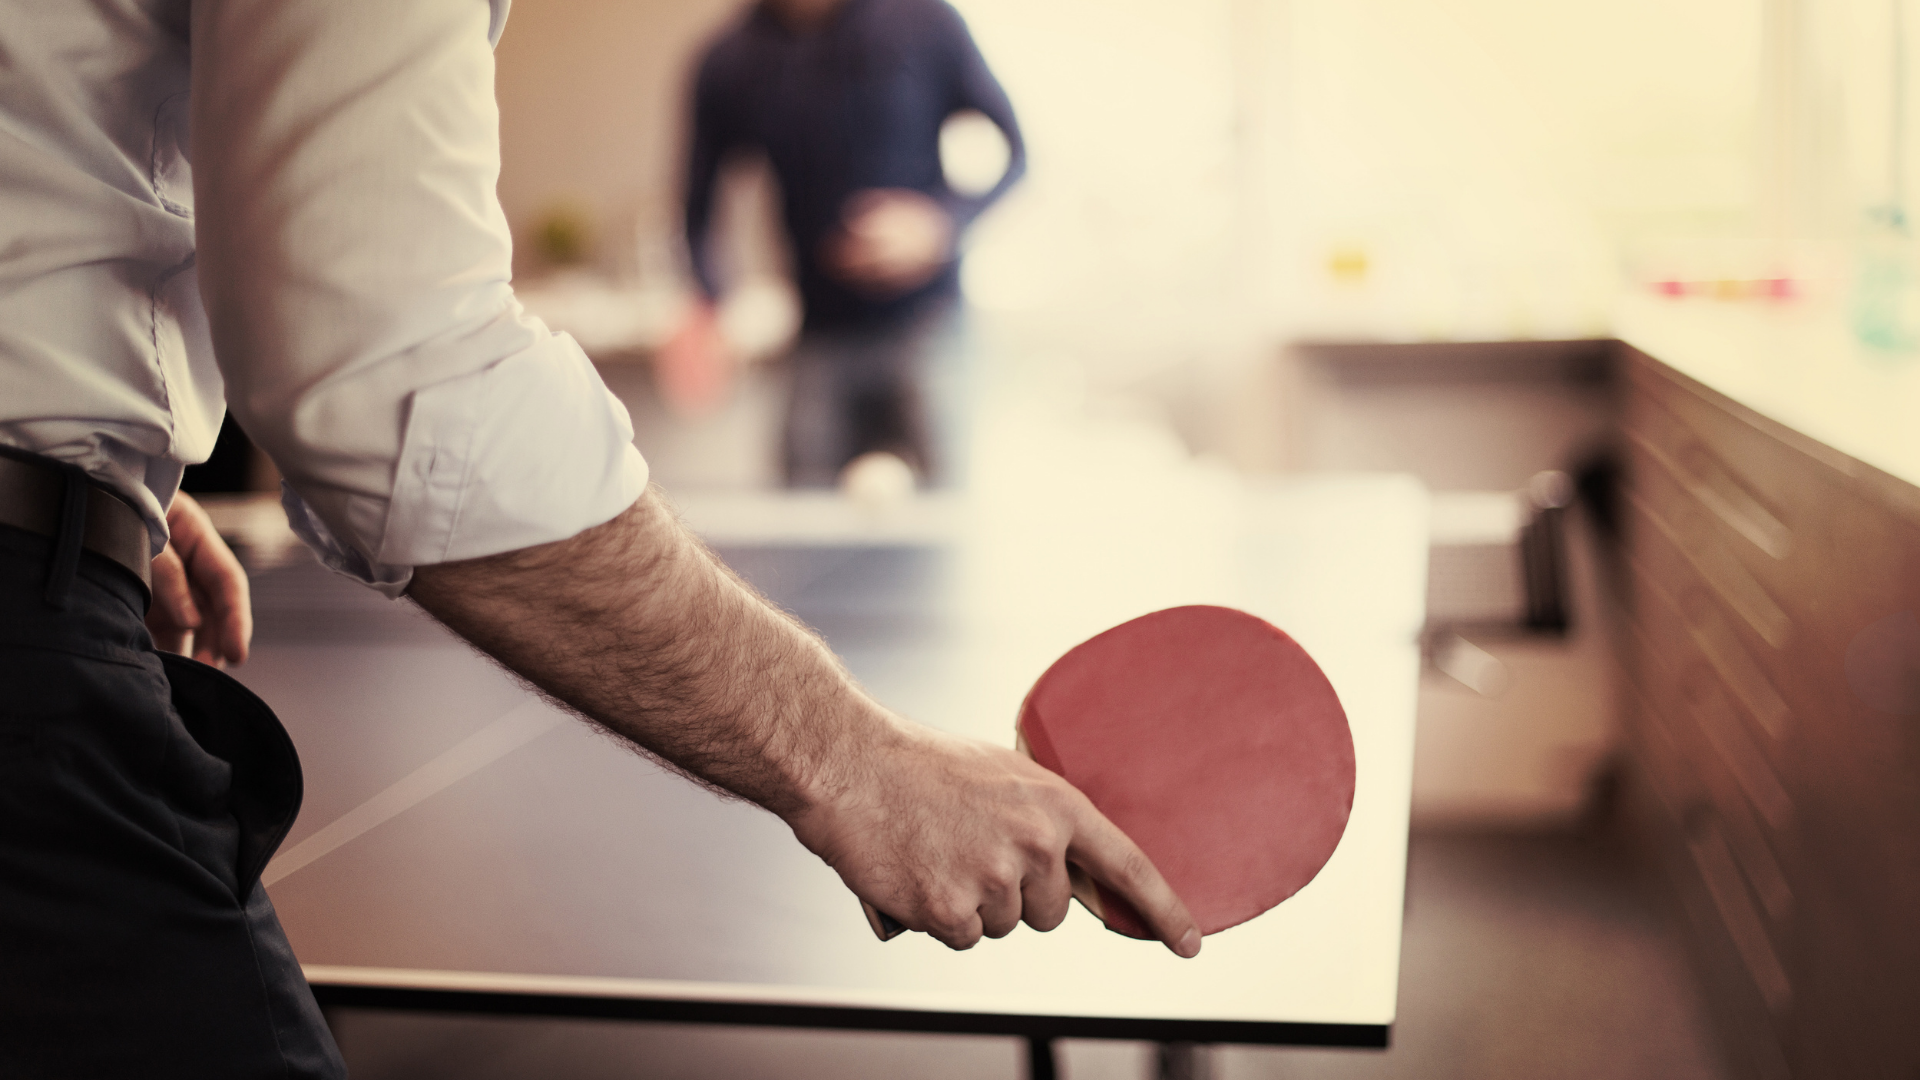 How was table tennis invented?